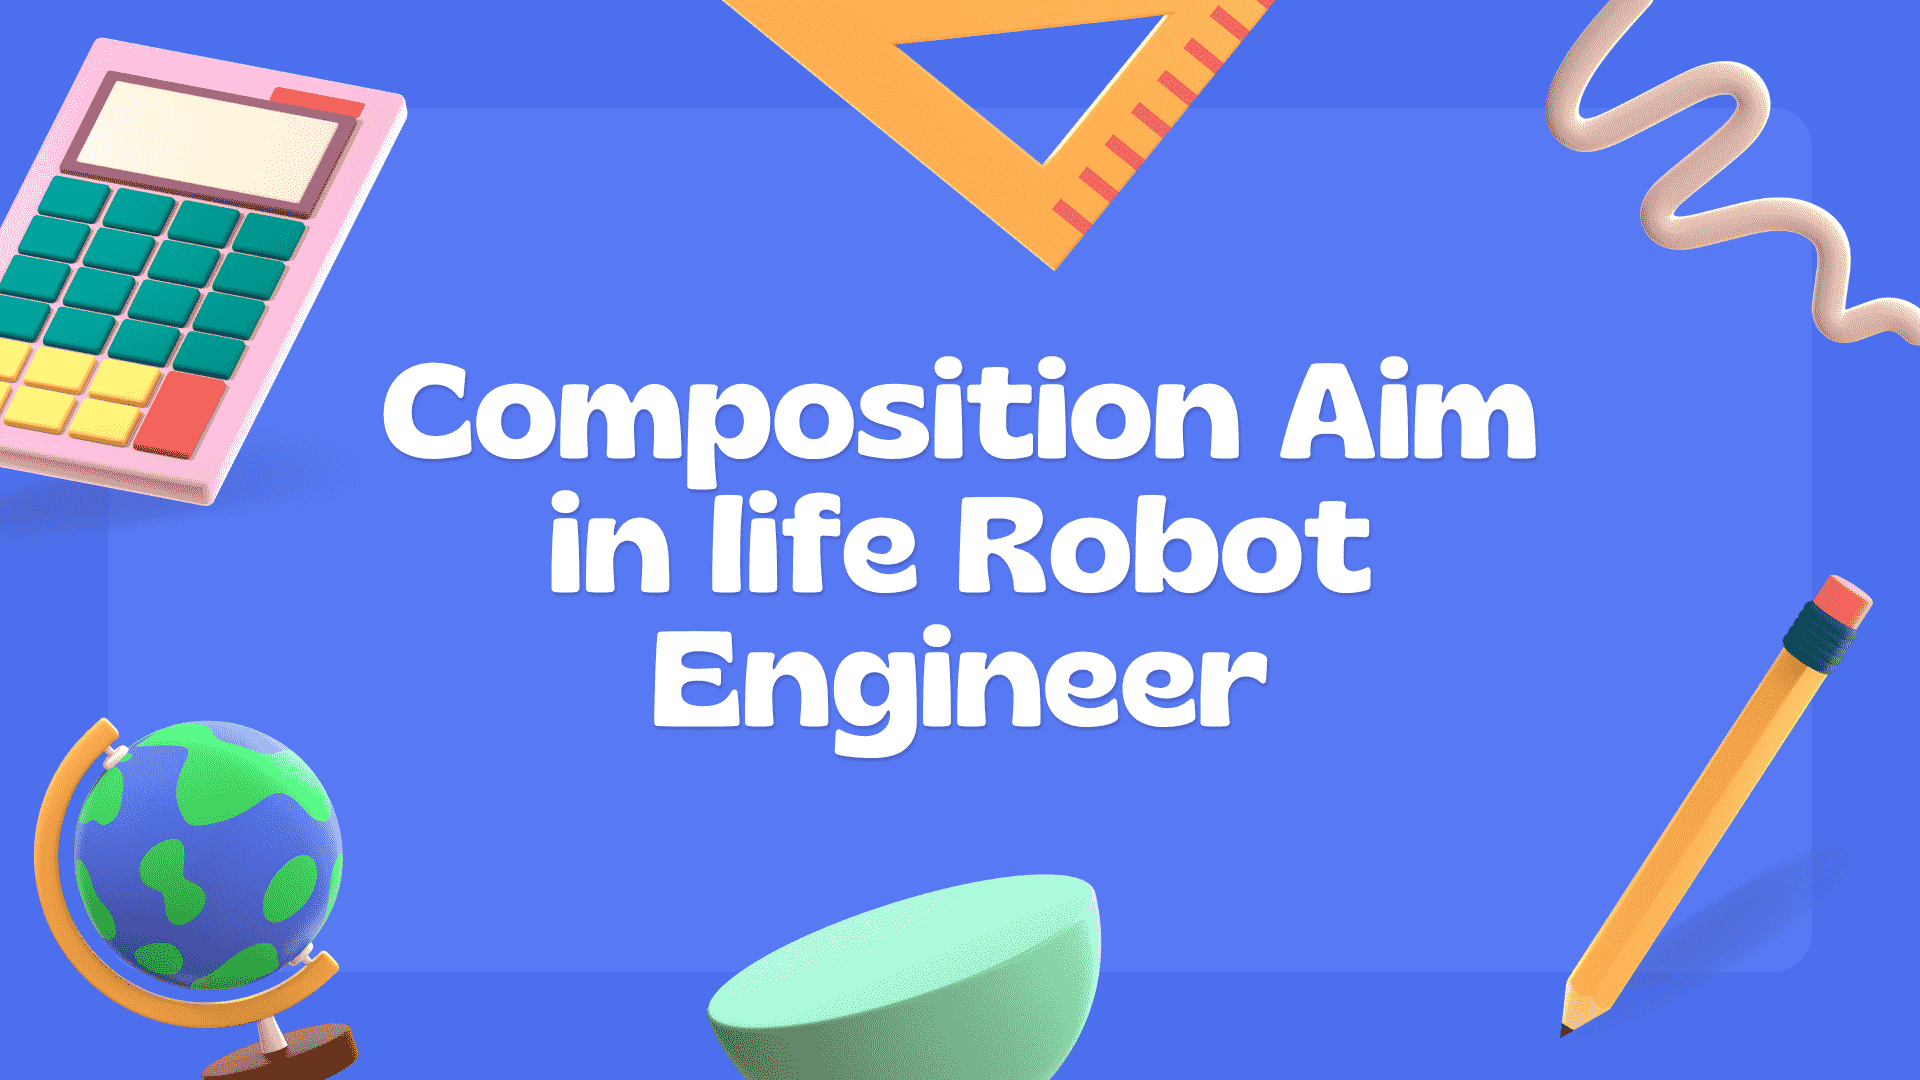 Composition Aim in life Robot Engineer